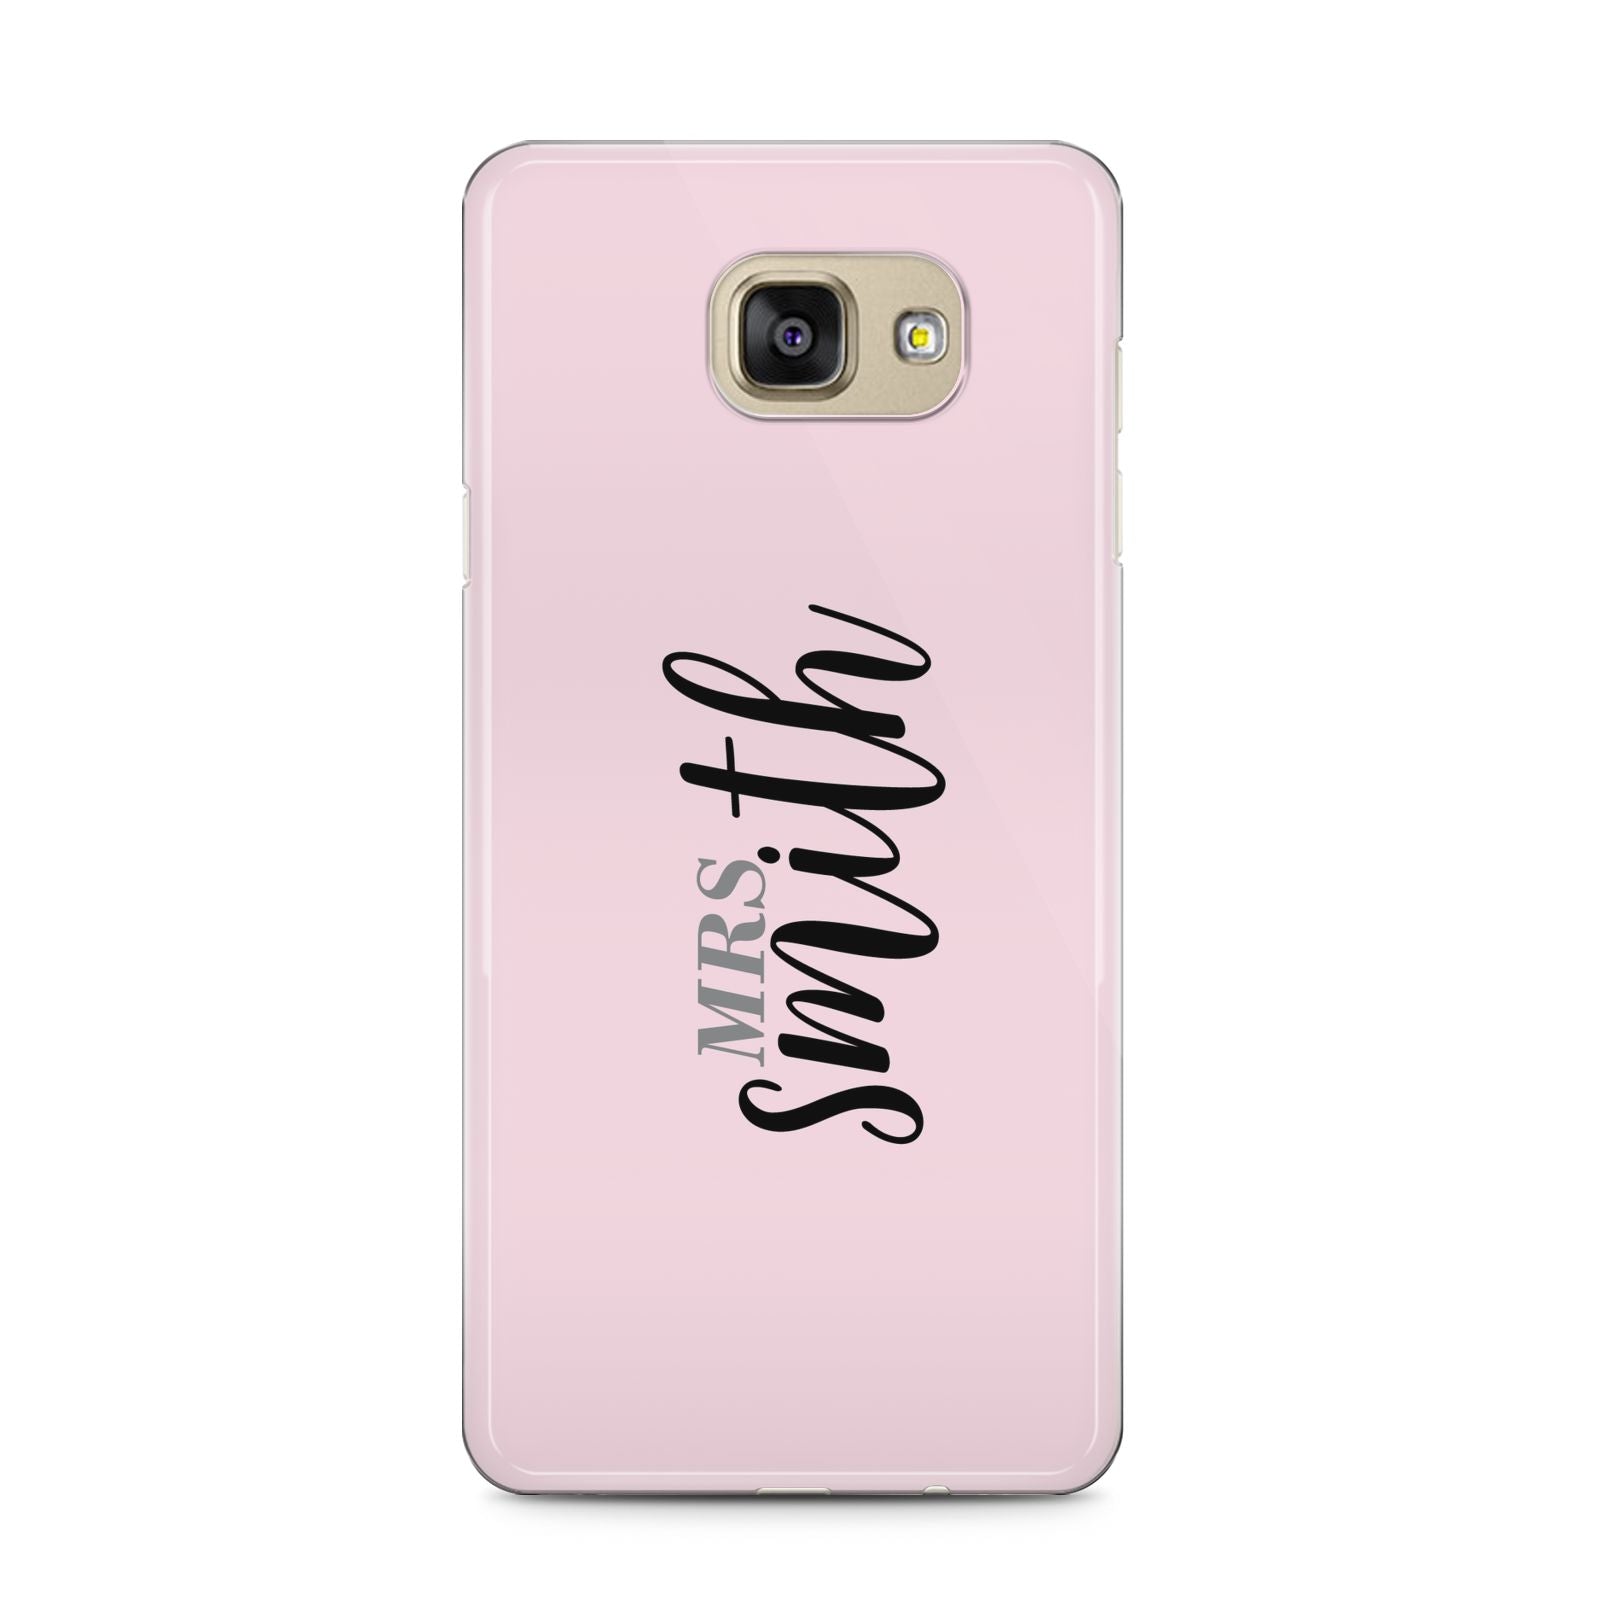 Personalised Bridal Samsung Galaxy A5 2016 Case on gold phone